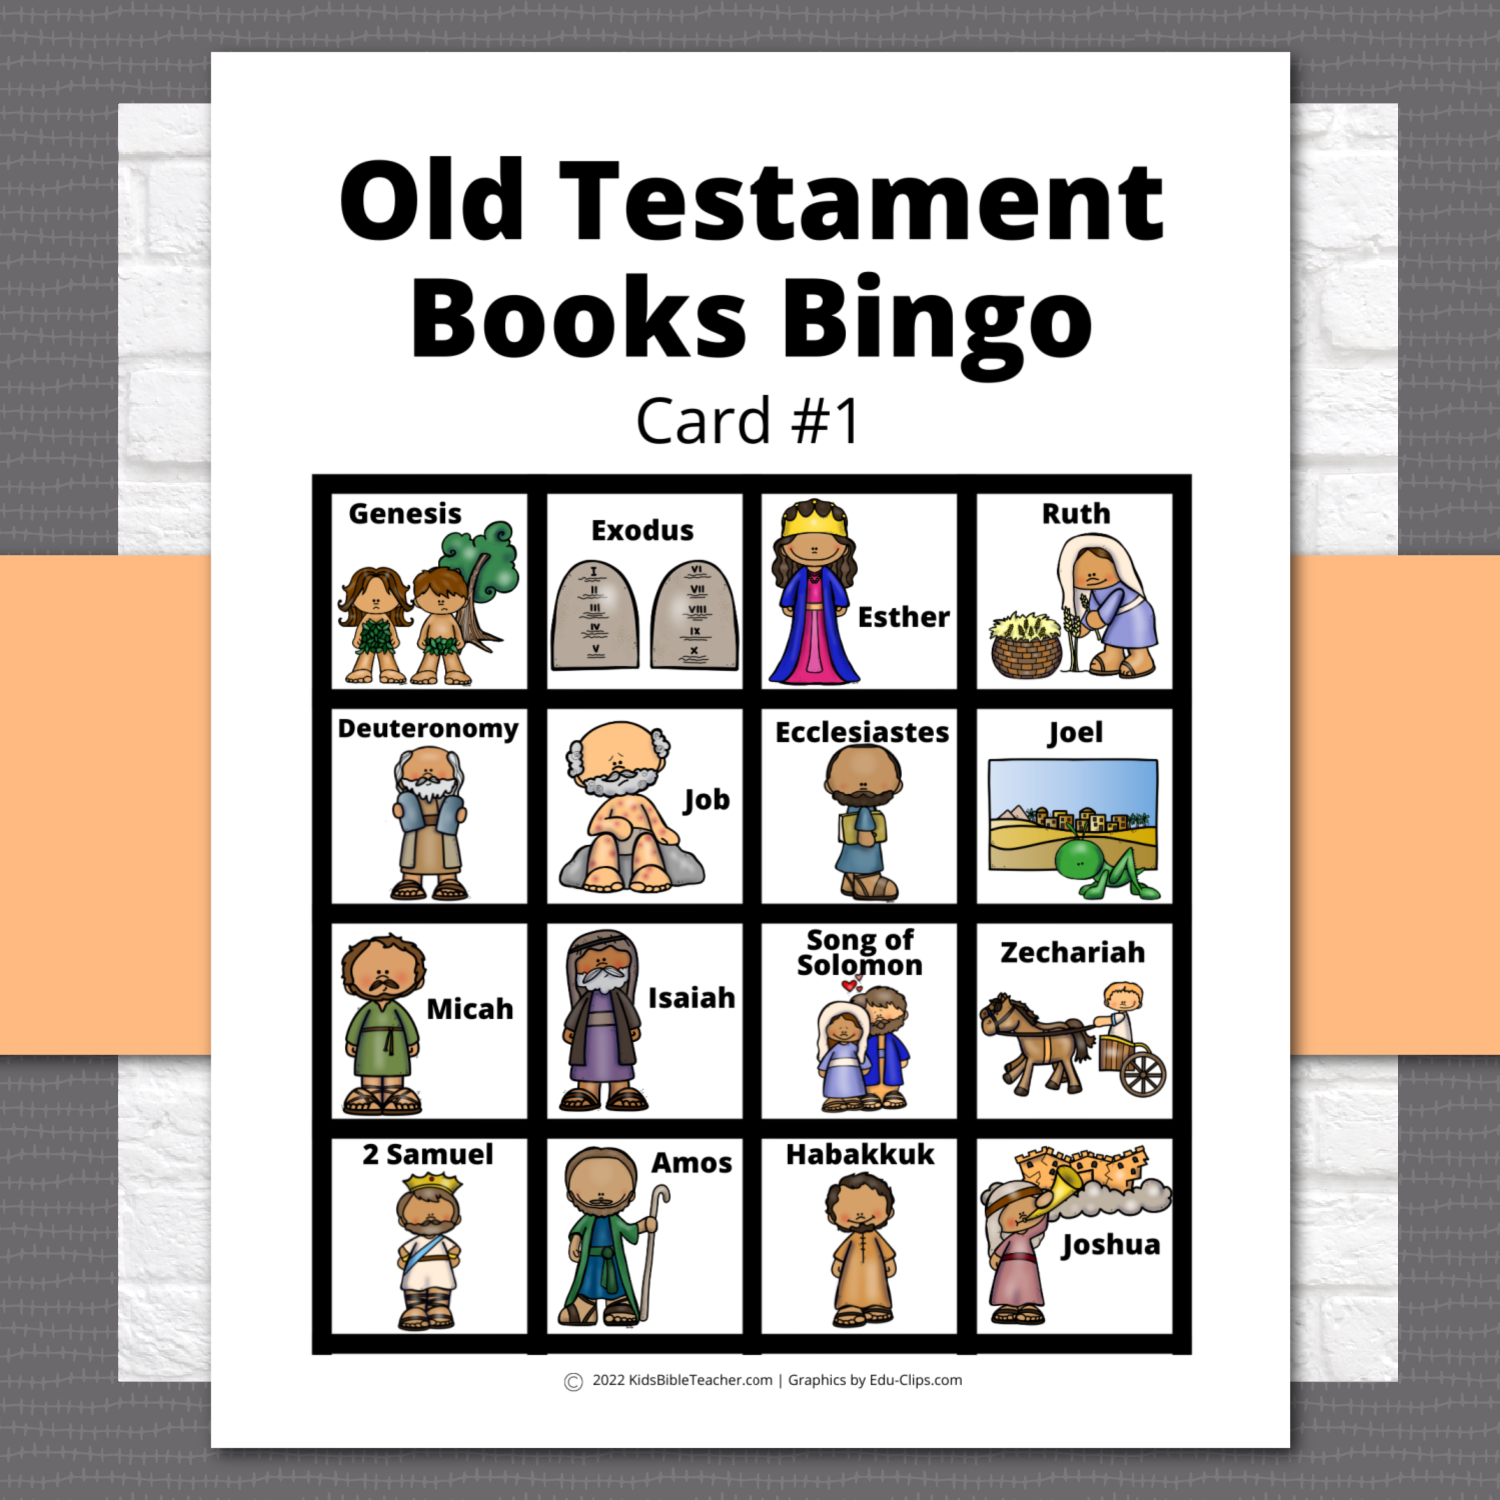 Books of the Bible Old Testament Games Bundle